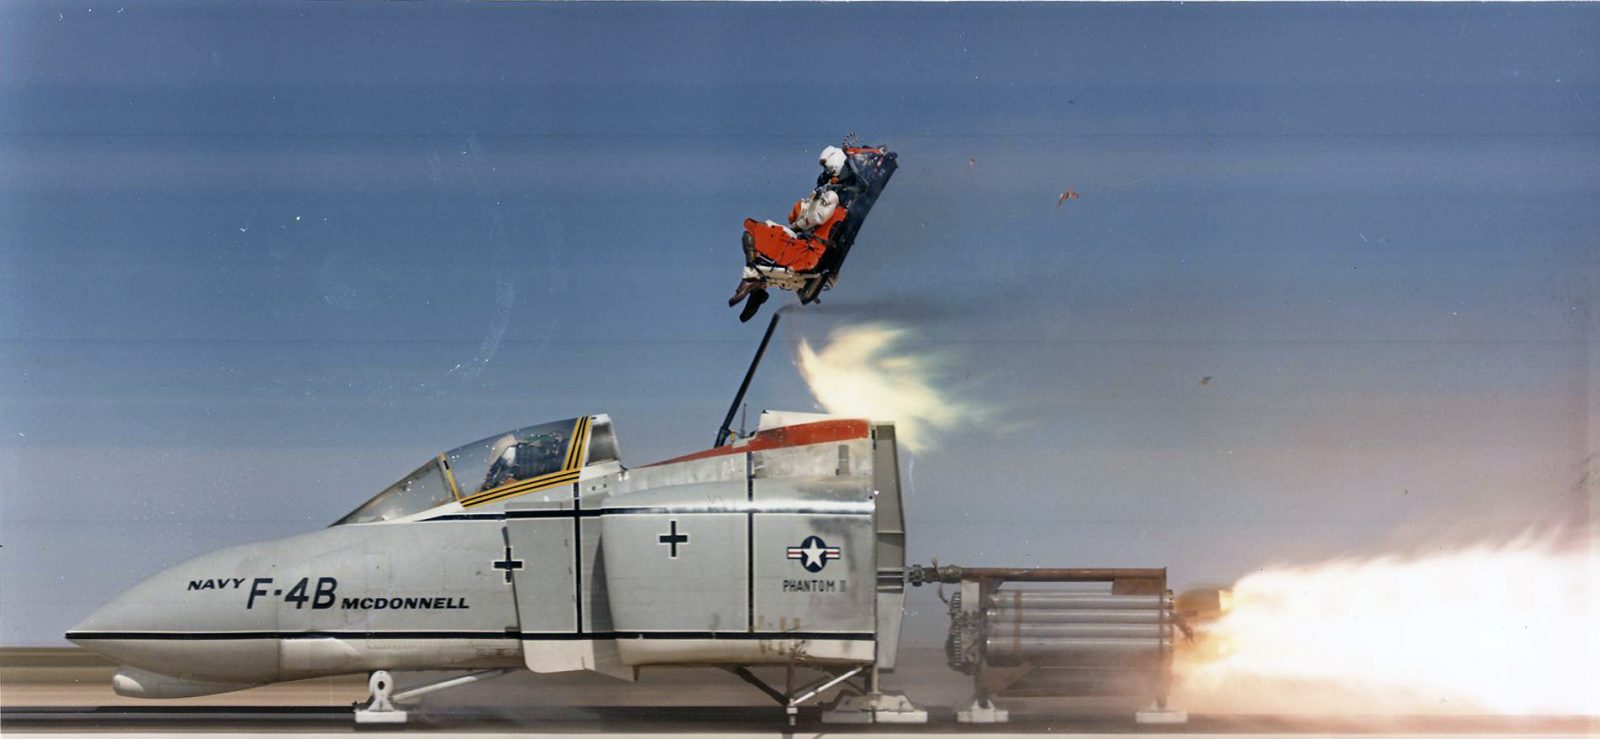 Ejection Seat G Force Archives